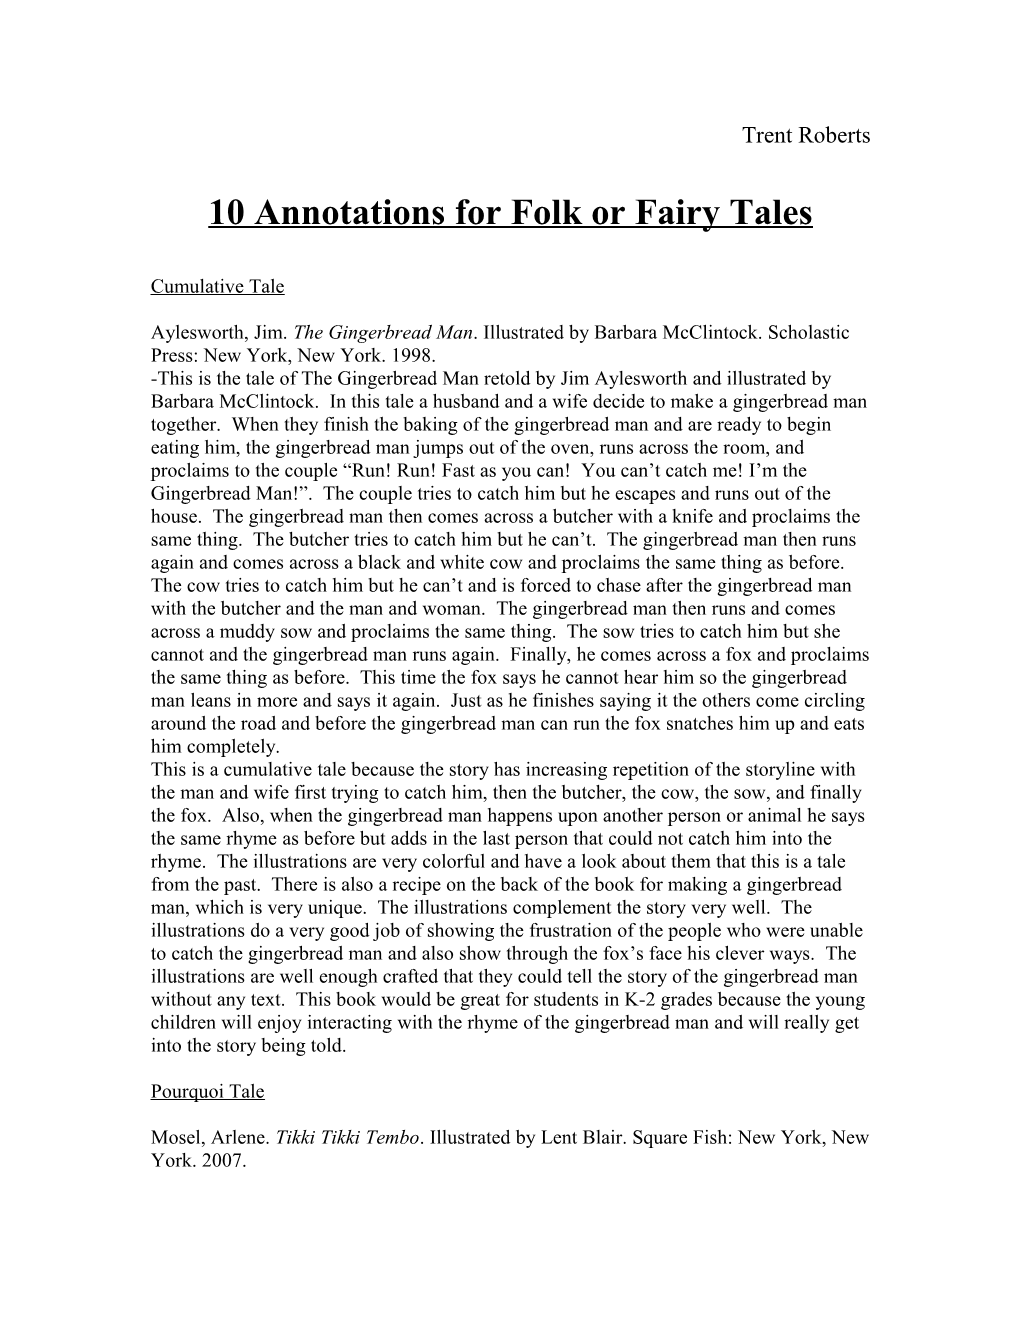 10 Annotations for Folk Or Fairy Tales